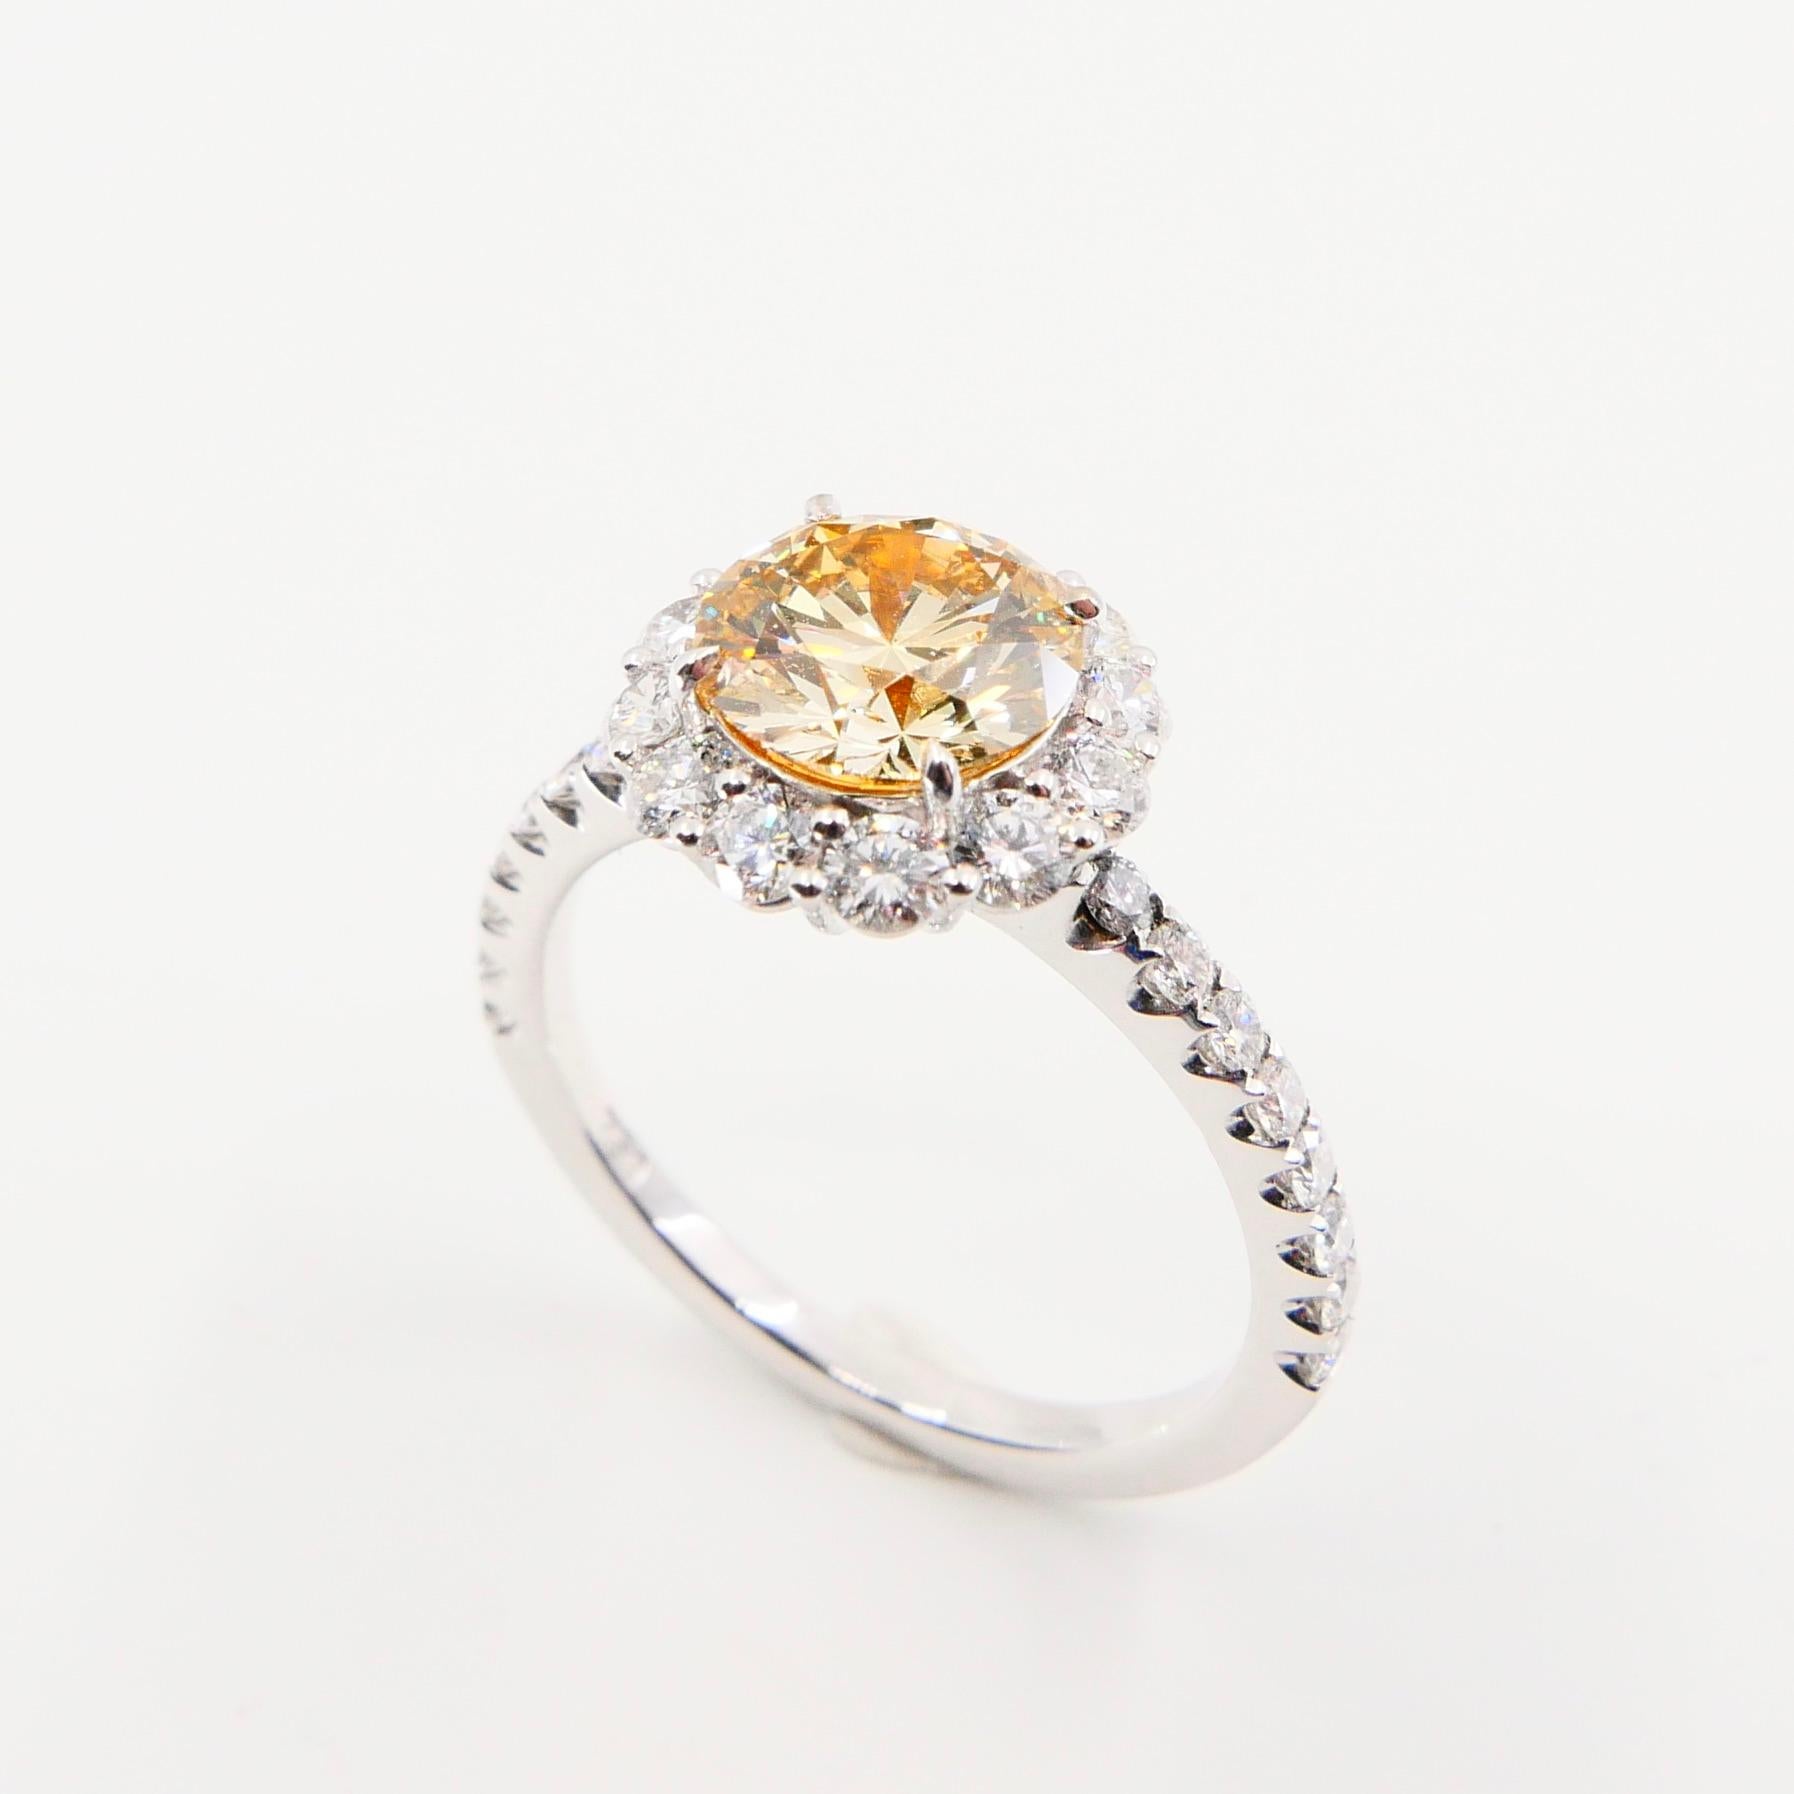 Contemporary GIA Certified 1.23 Fancy Light Brownish Yellow Diamond Cocktail Ring VS2 Clarity